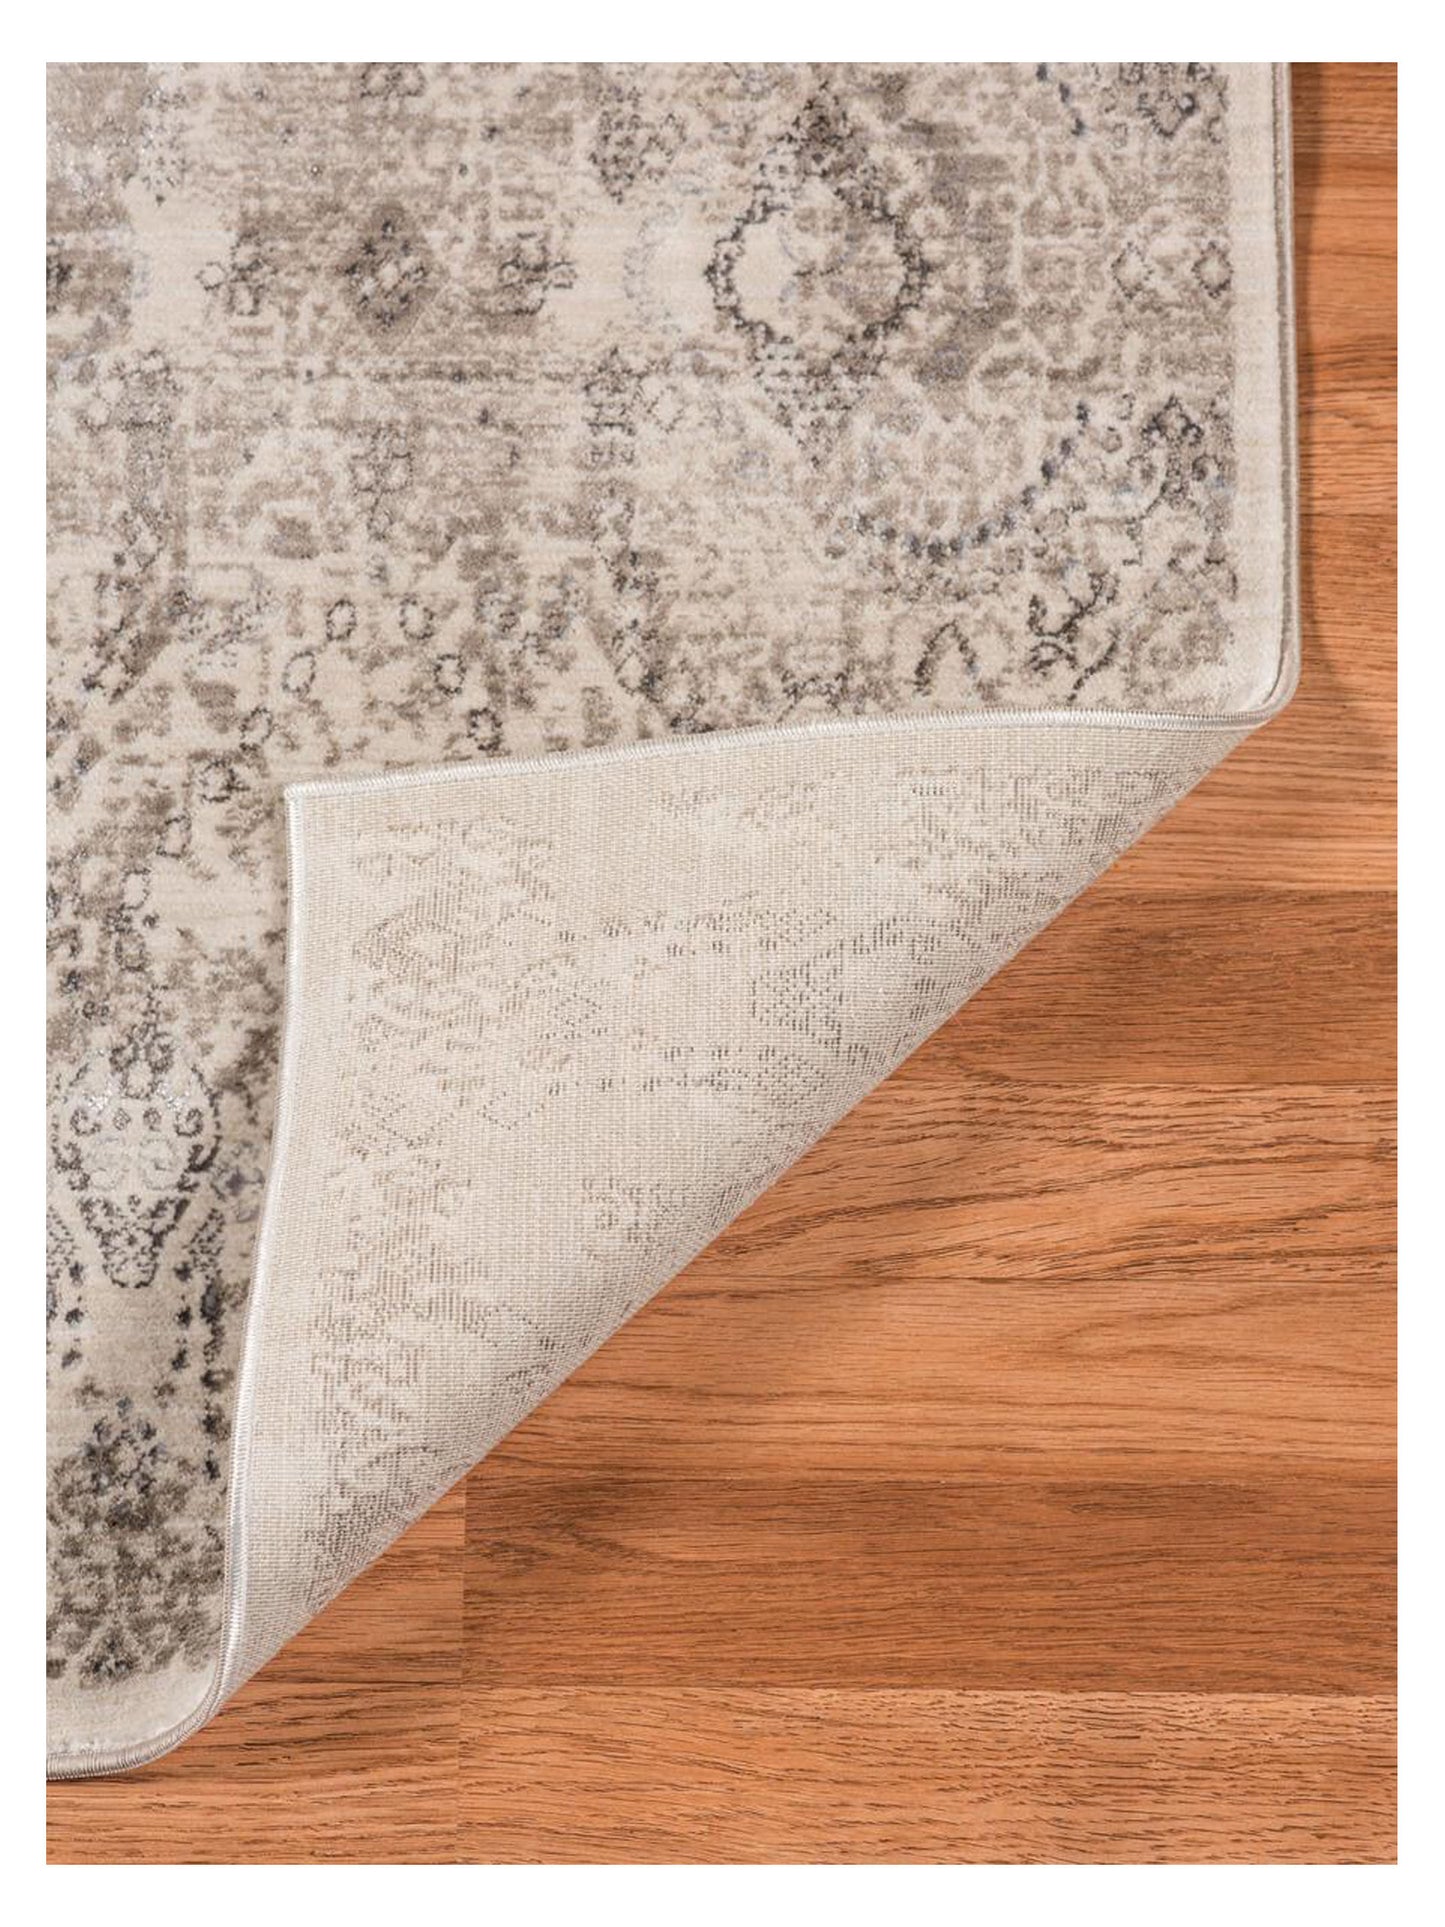 Limited Rosy RO-507 Beige  Transitional Machinemade Rug